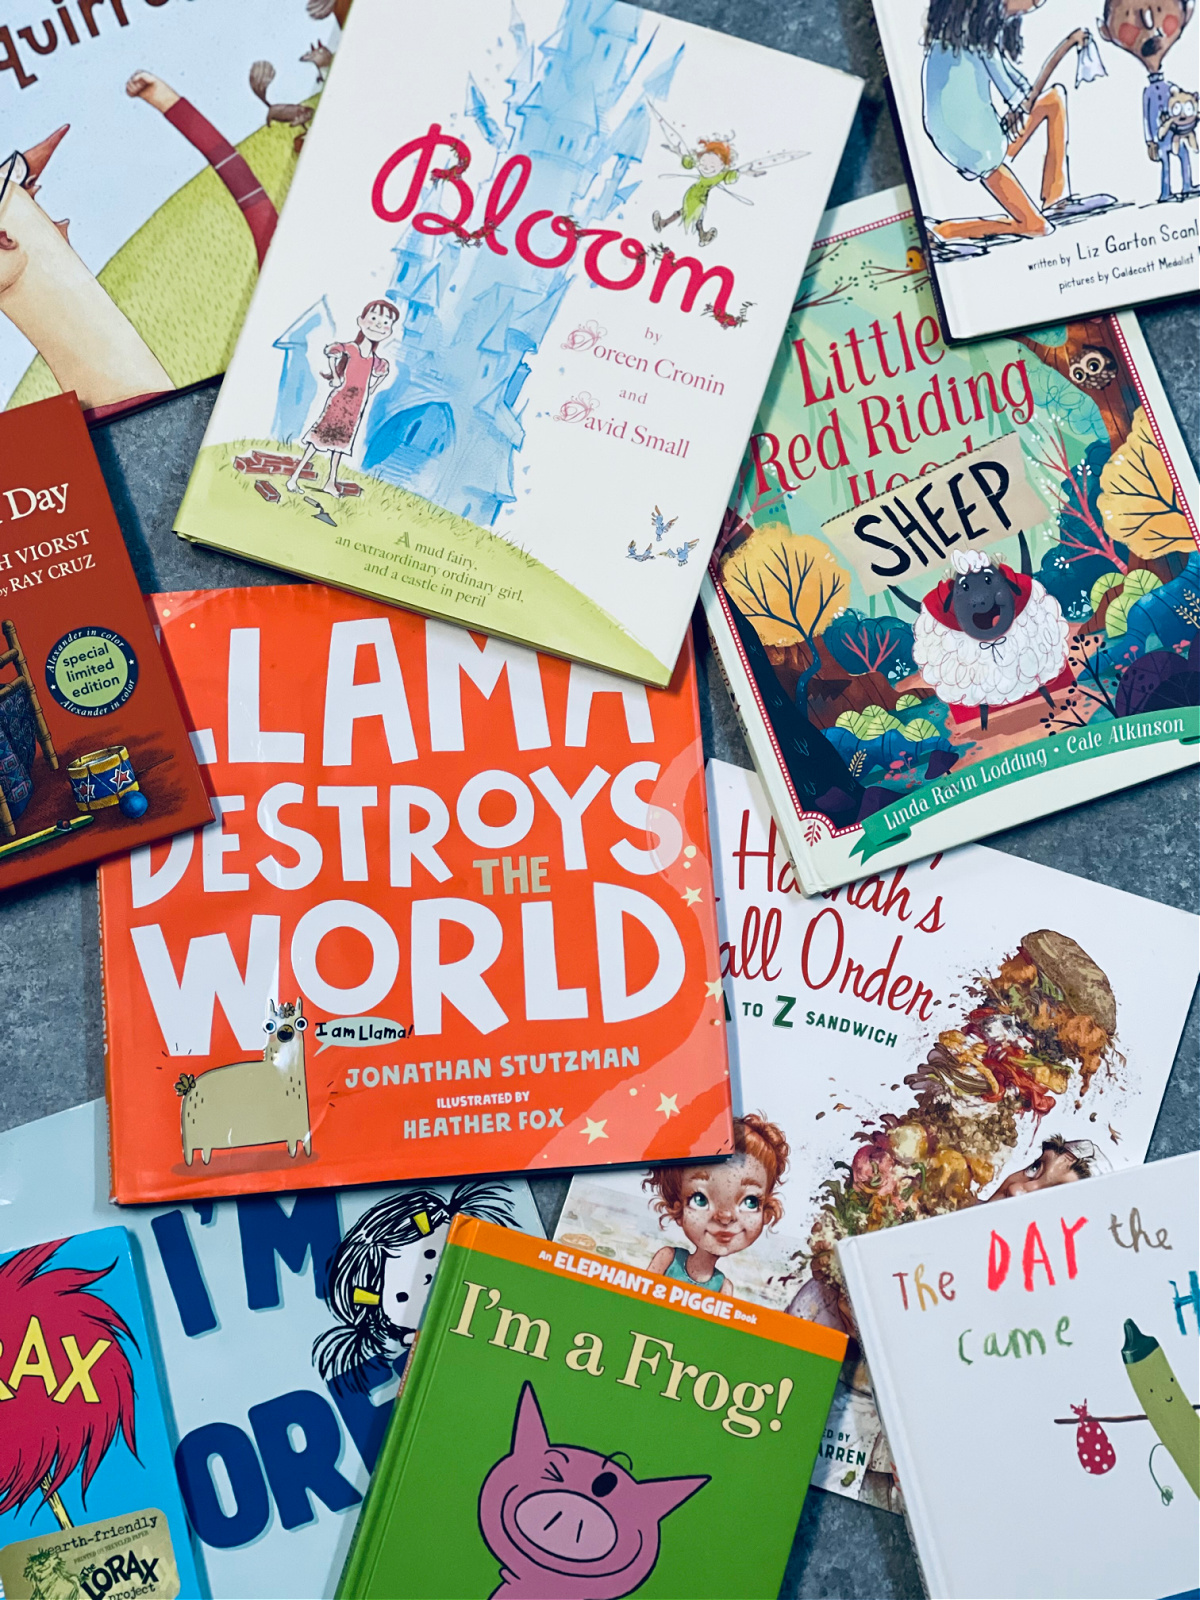 favorite picture books spread out on a surface, including Bloom, Llama Destroys the World and I'm a Frog!